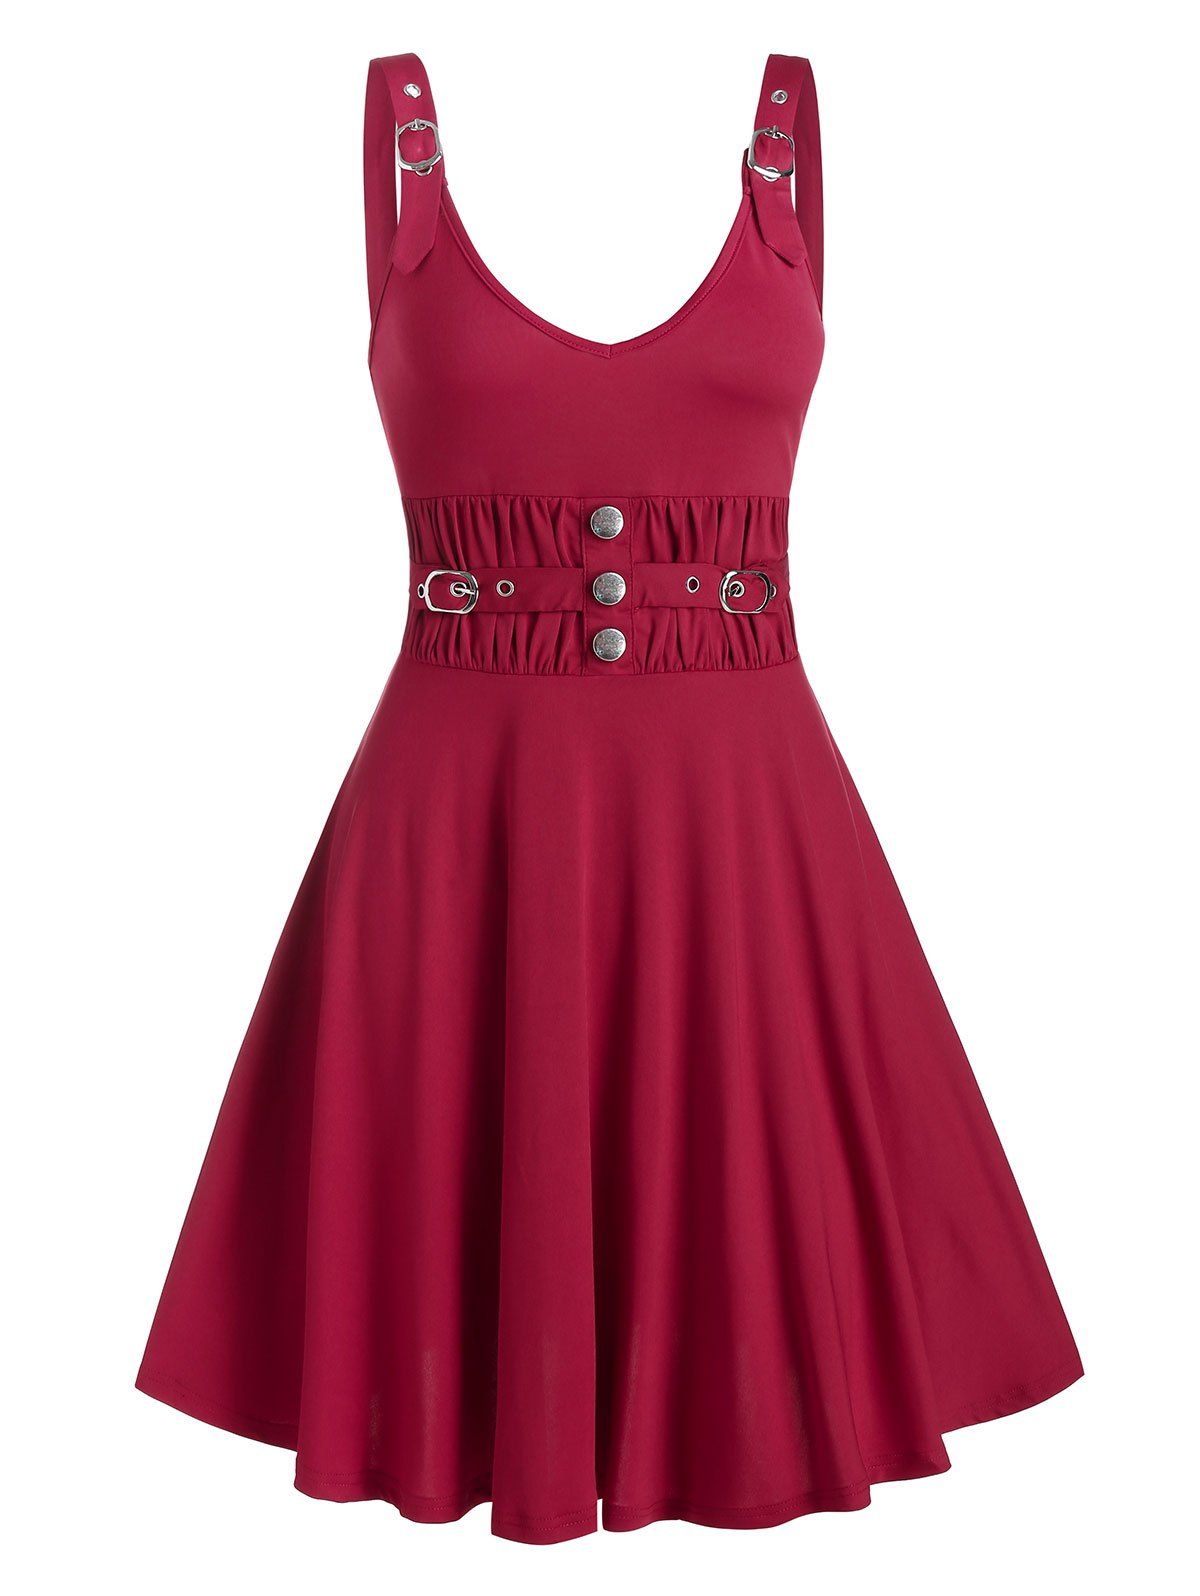 Buckle Button Ruched Waist A Line Dress - RED WINE L